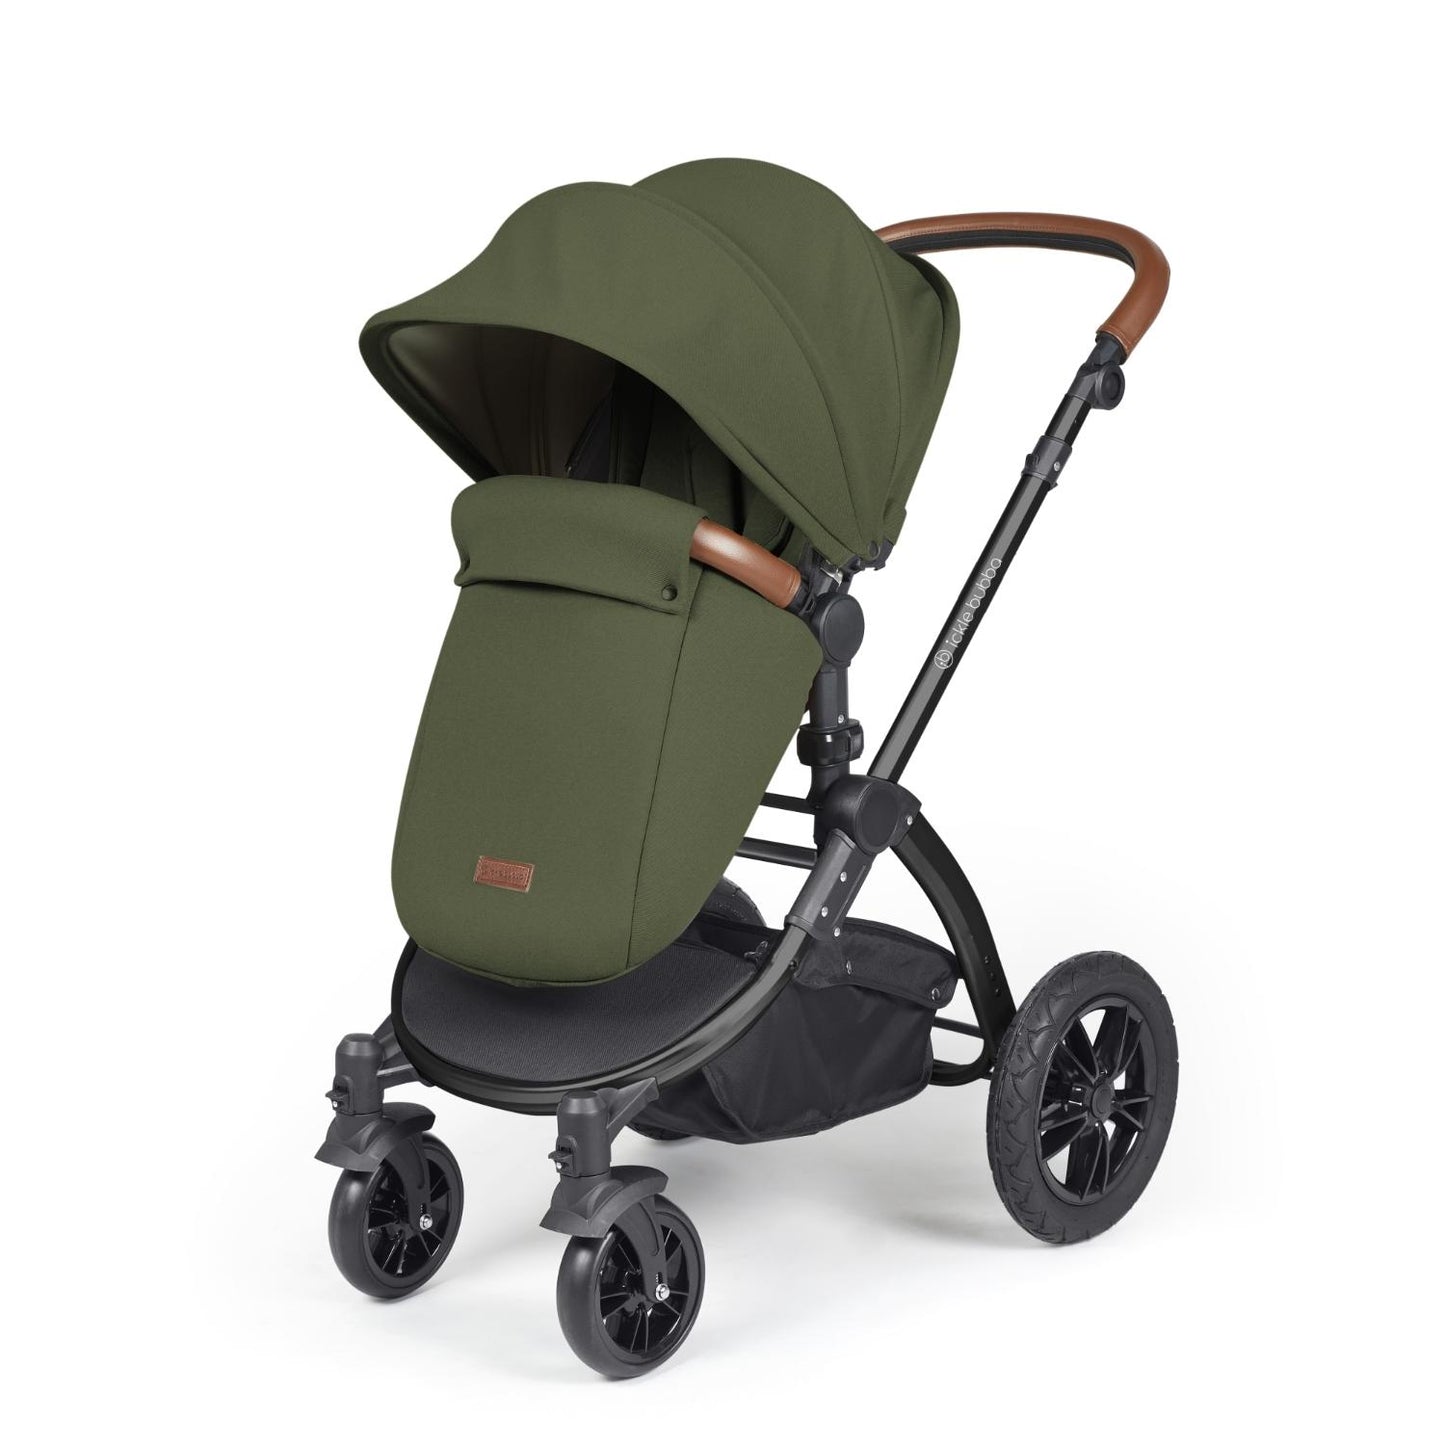 Ickle Bubba Stomp Luxe Pushchair with foot warmer attached in Woodland green colour with tan handle